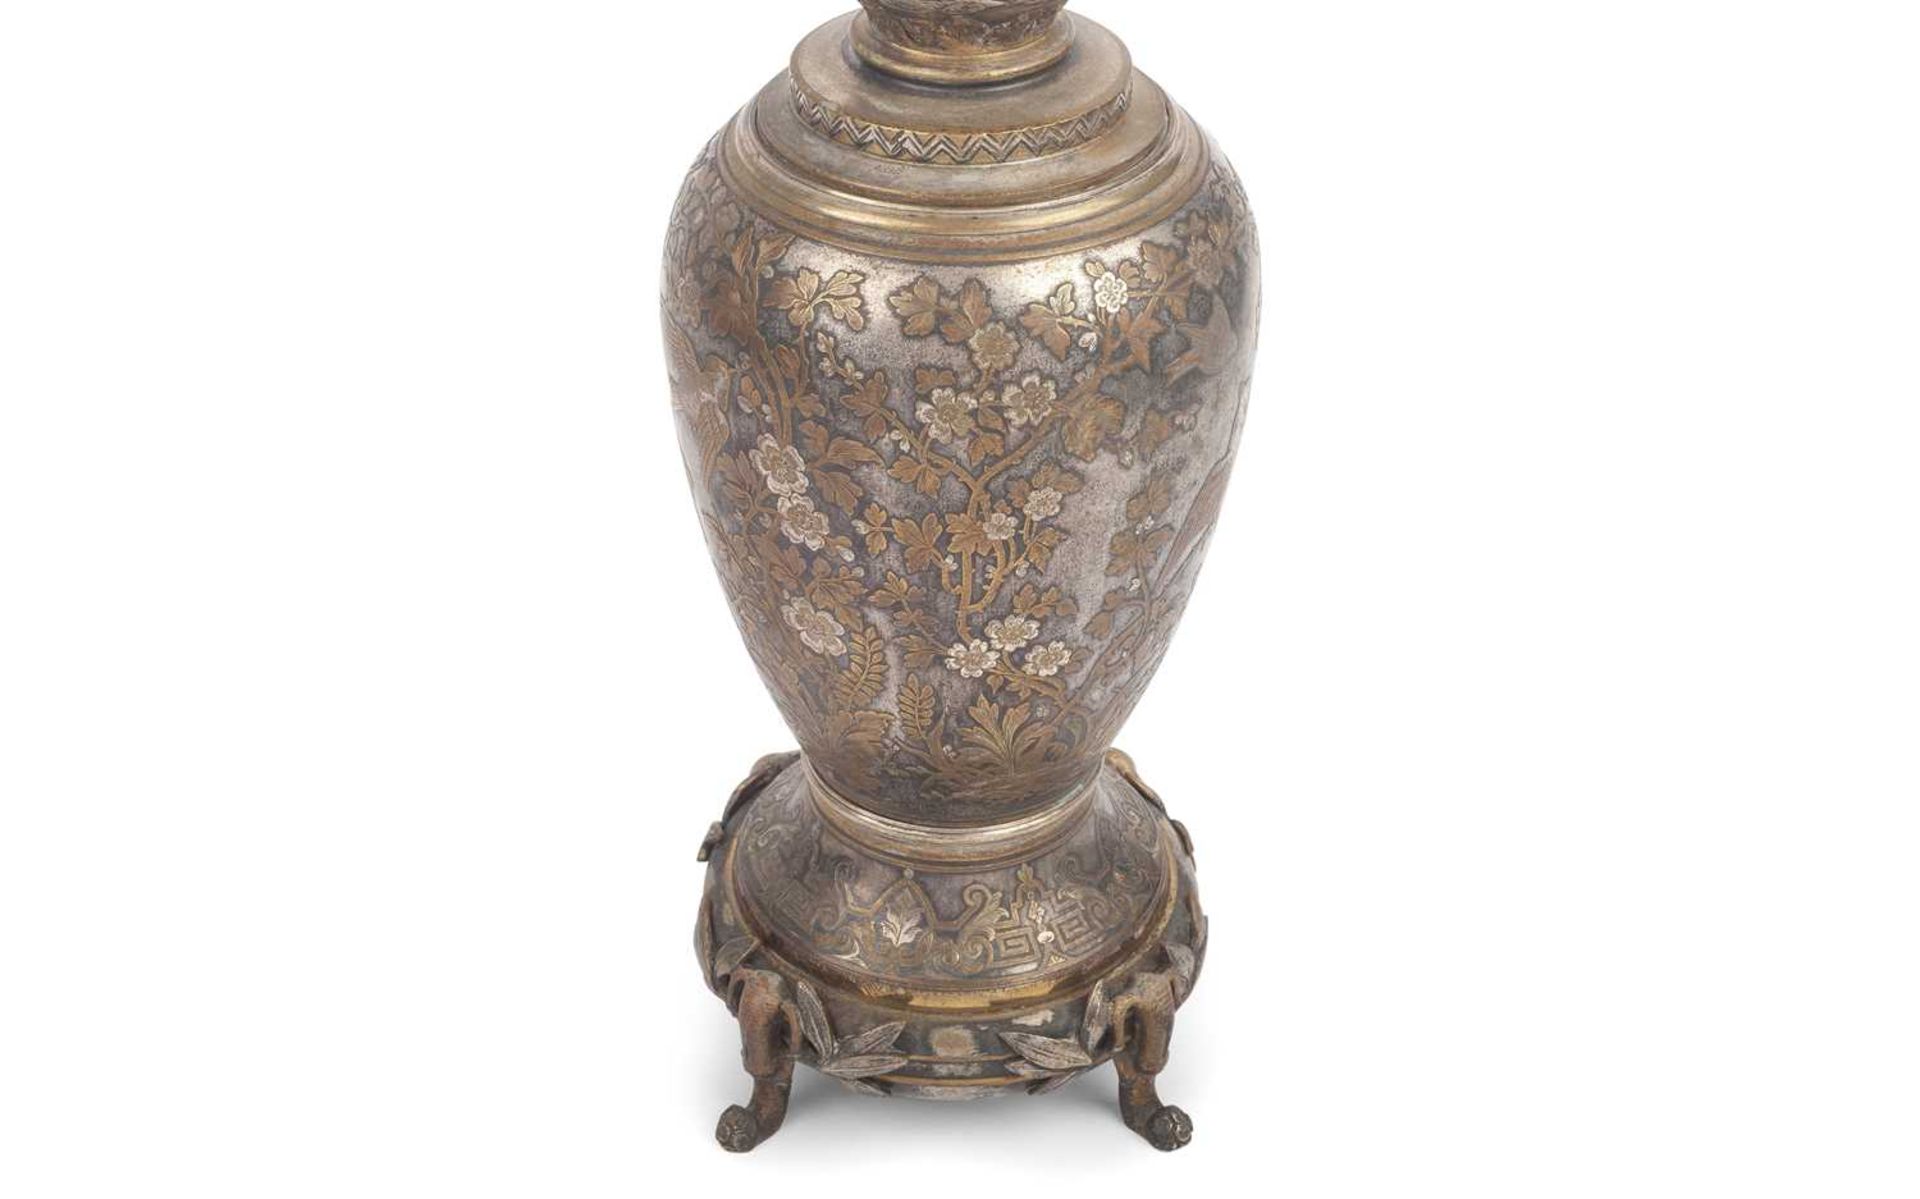 MANNER OF CHRISTOFLE & CIE: A FINE 19TH CENTURY FRENCH JAPONISME STYLE SILVERED METAL LAMP BASE - Image 3 of 5